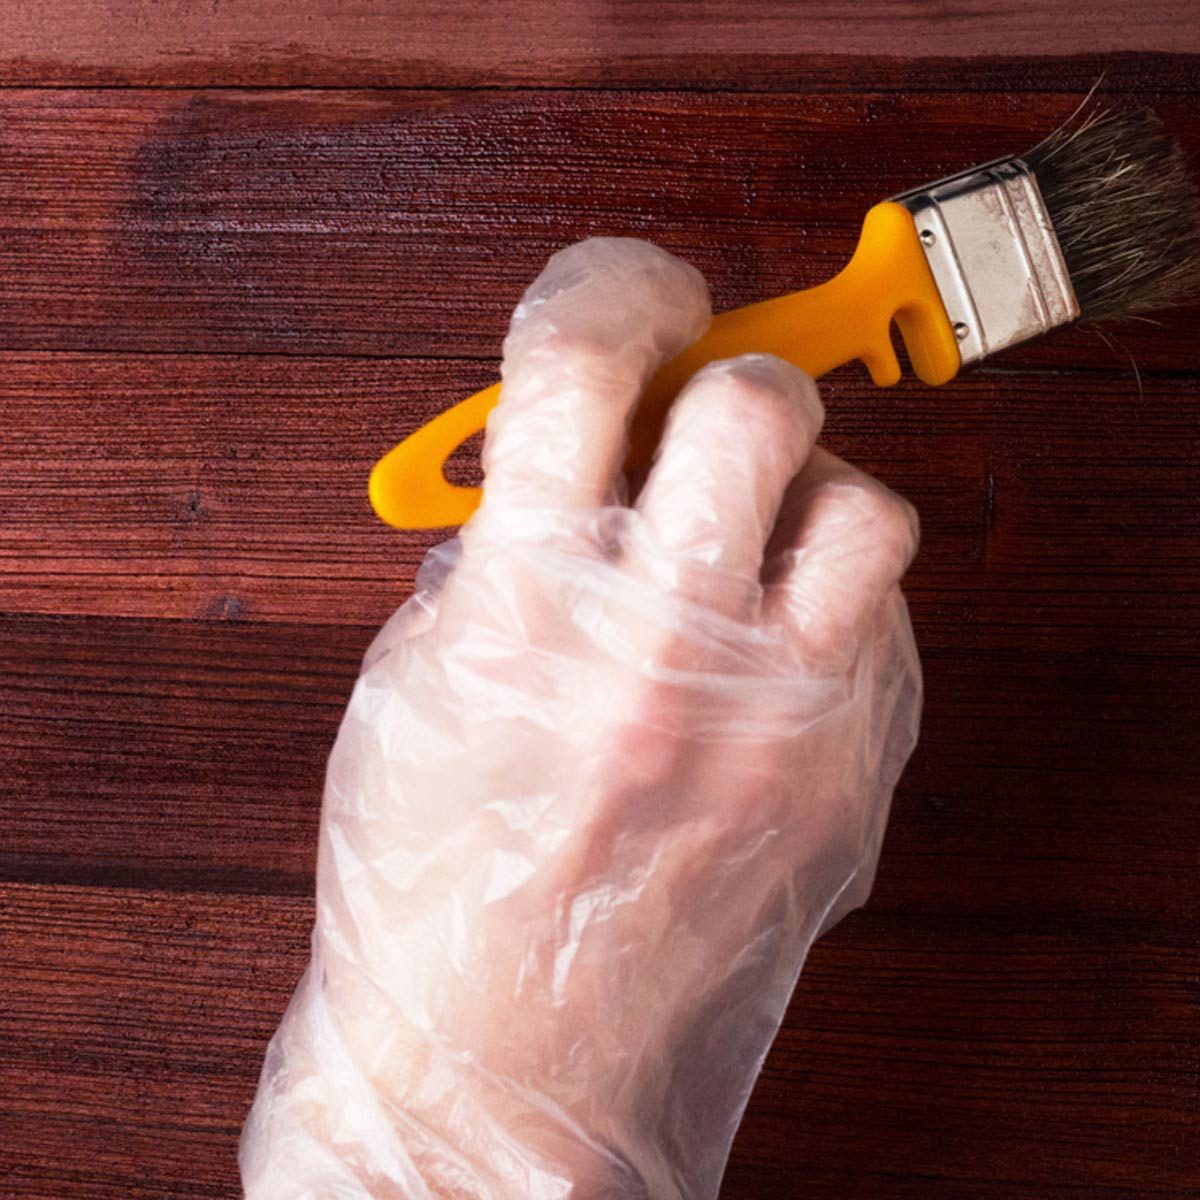 10 Tips For Wood Floor Scratch Repair The Family Handyman